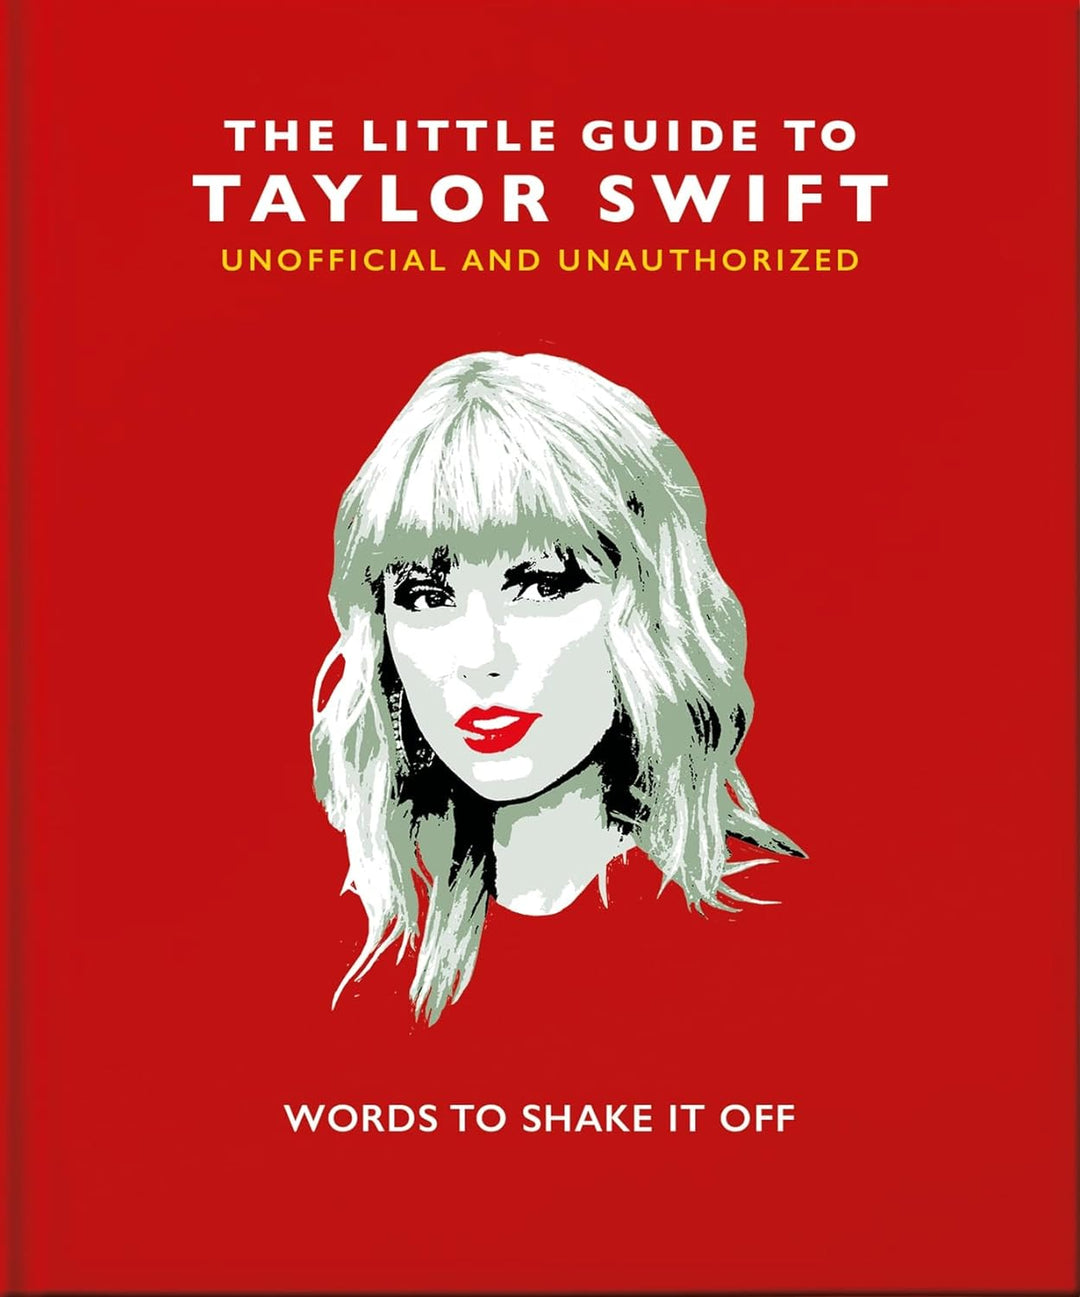 Little Guide To Taylor Swift Book